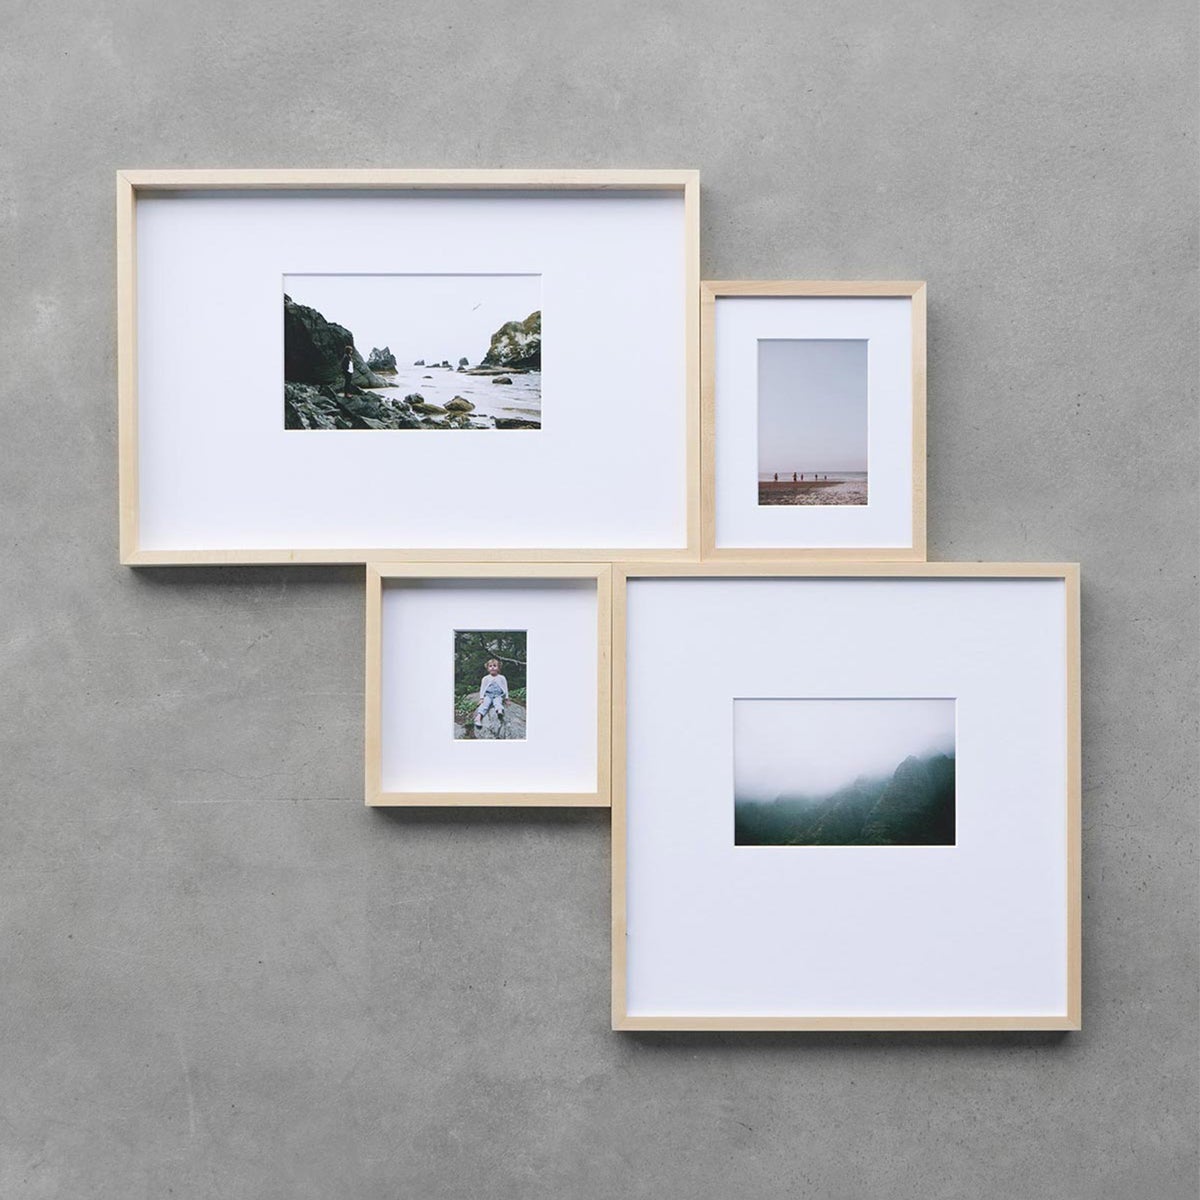 10 Ways to Decorate with Empty Thrift Store Frames | anderson + grant